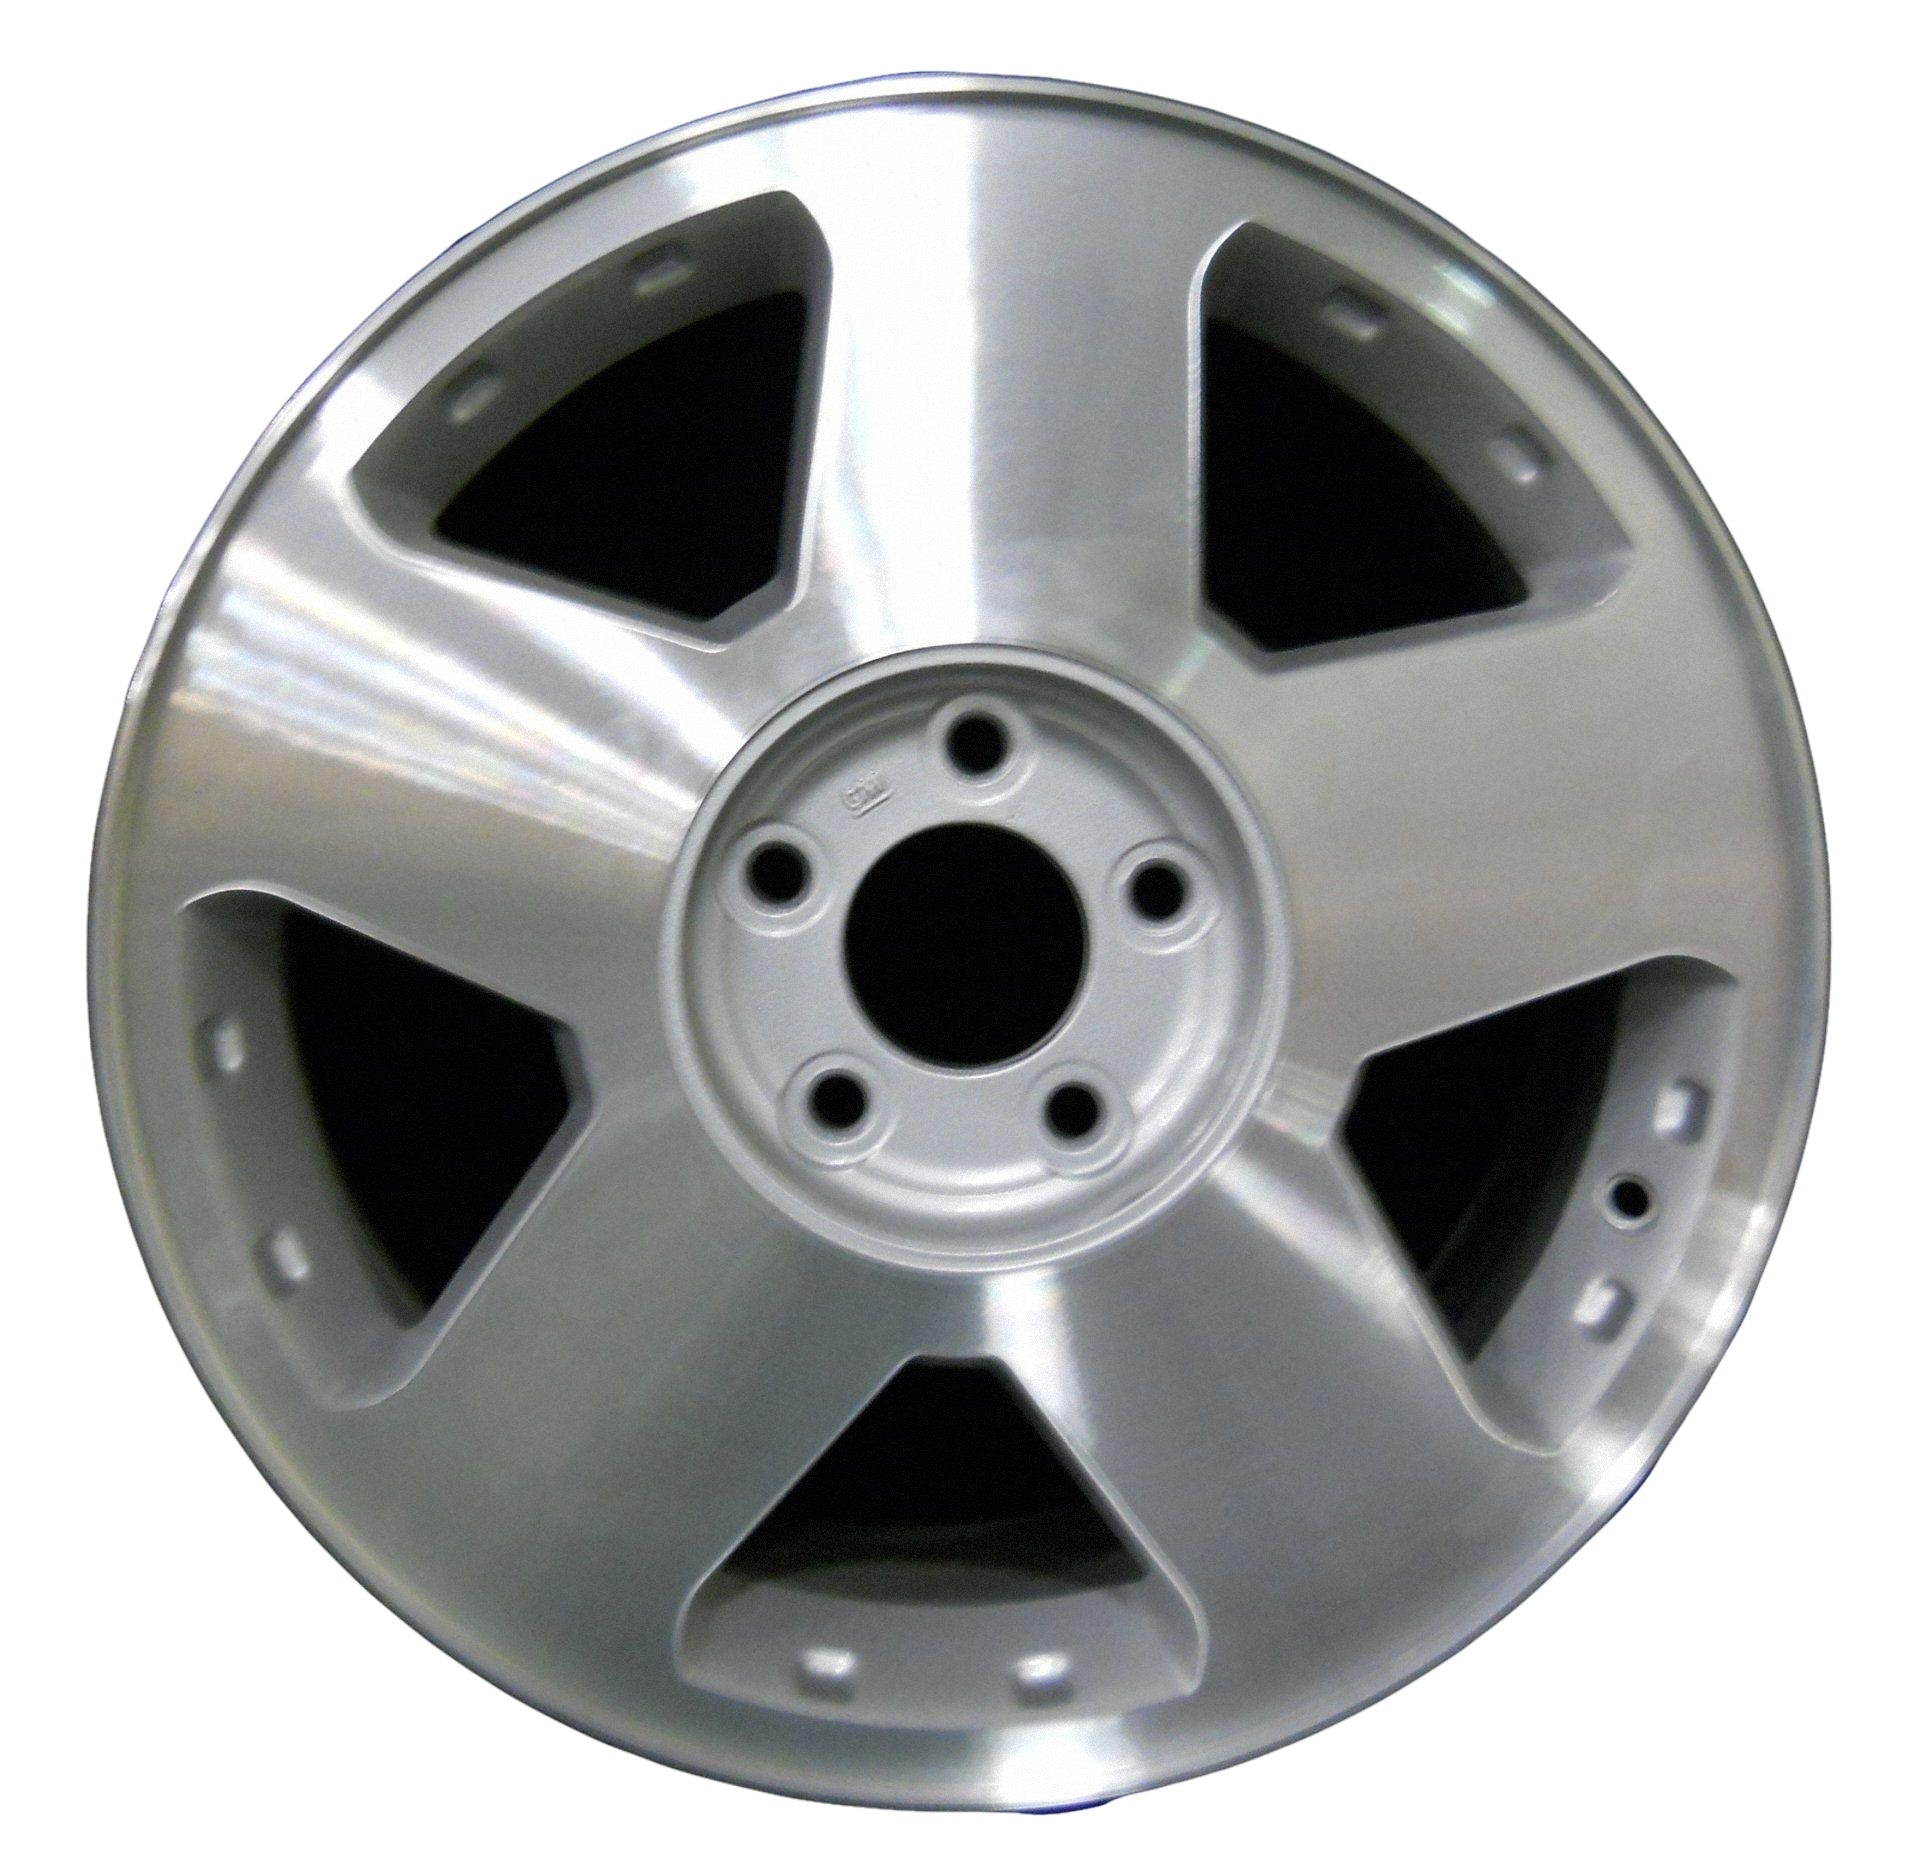 Saturn Vue  2004, 2005, 2006, 2007 Factory OEM Car Wheel Size 17x7 Alloy WAO.7033.PS01.MA